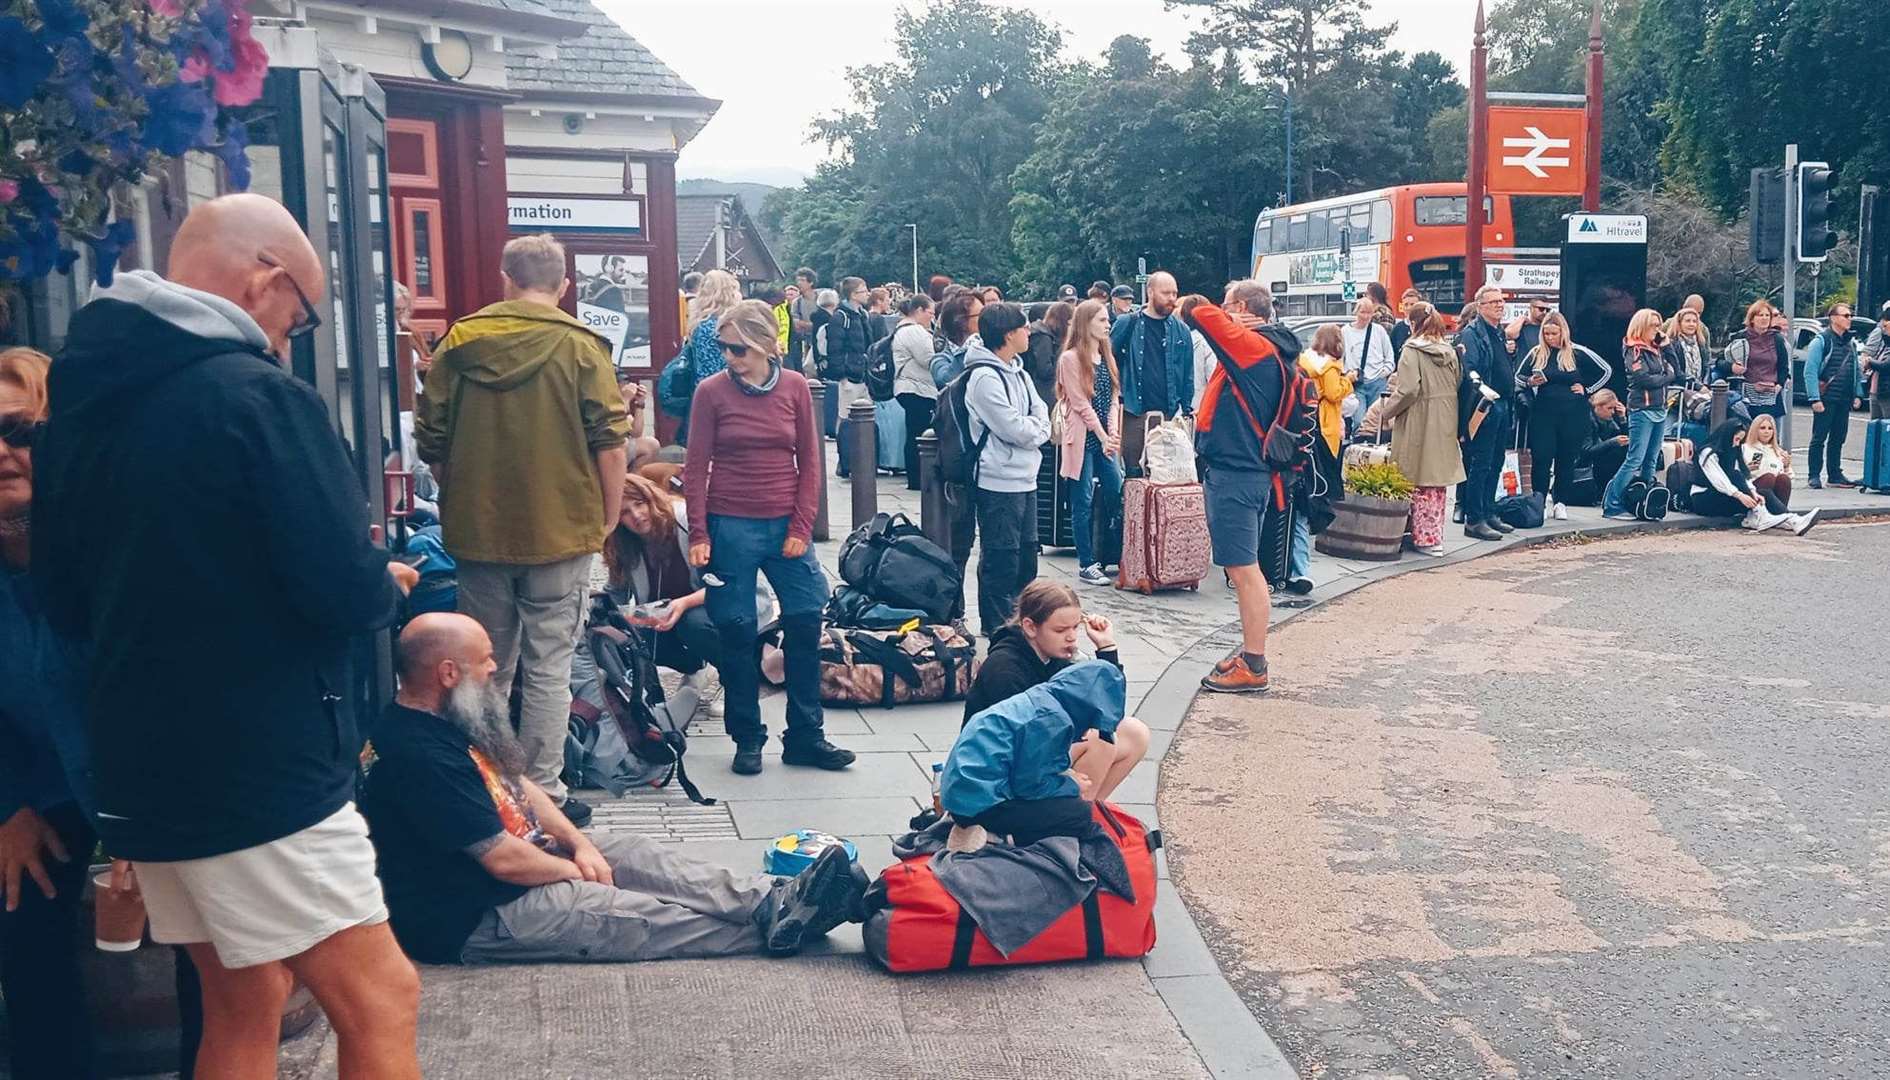 Some of the passengers forced off the train at Aviemore and having to 'make their own arrangements'